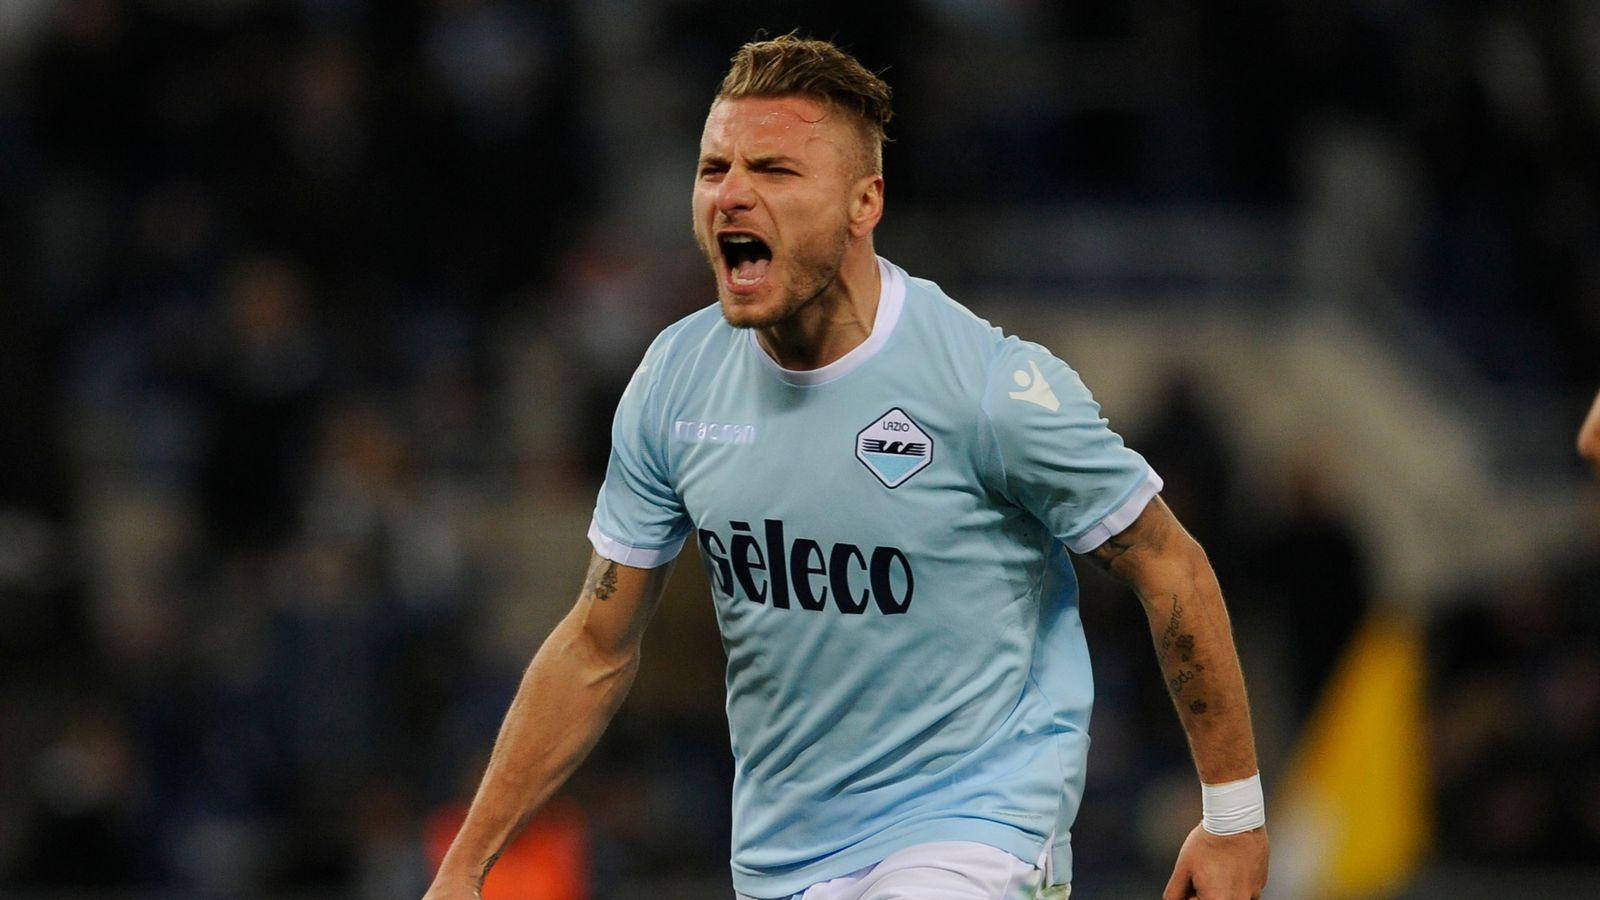 Ciro Immobile In Action On The Football Field Wallpaper